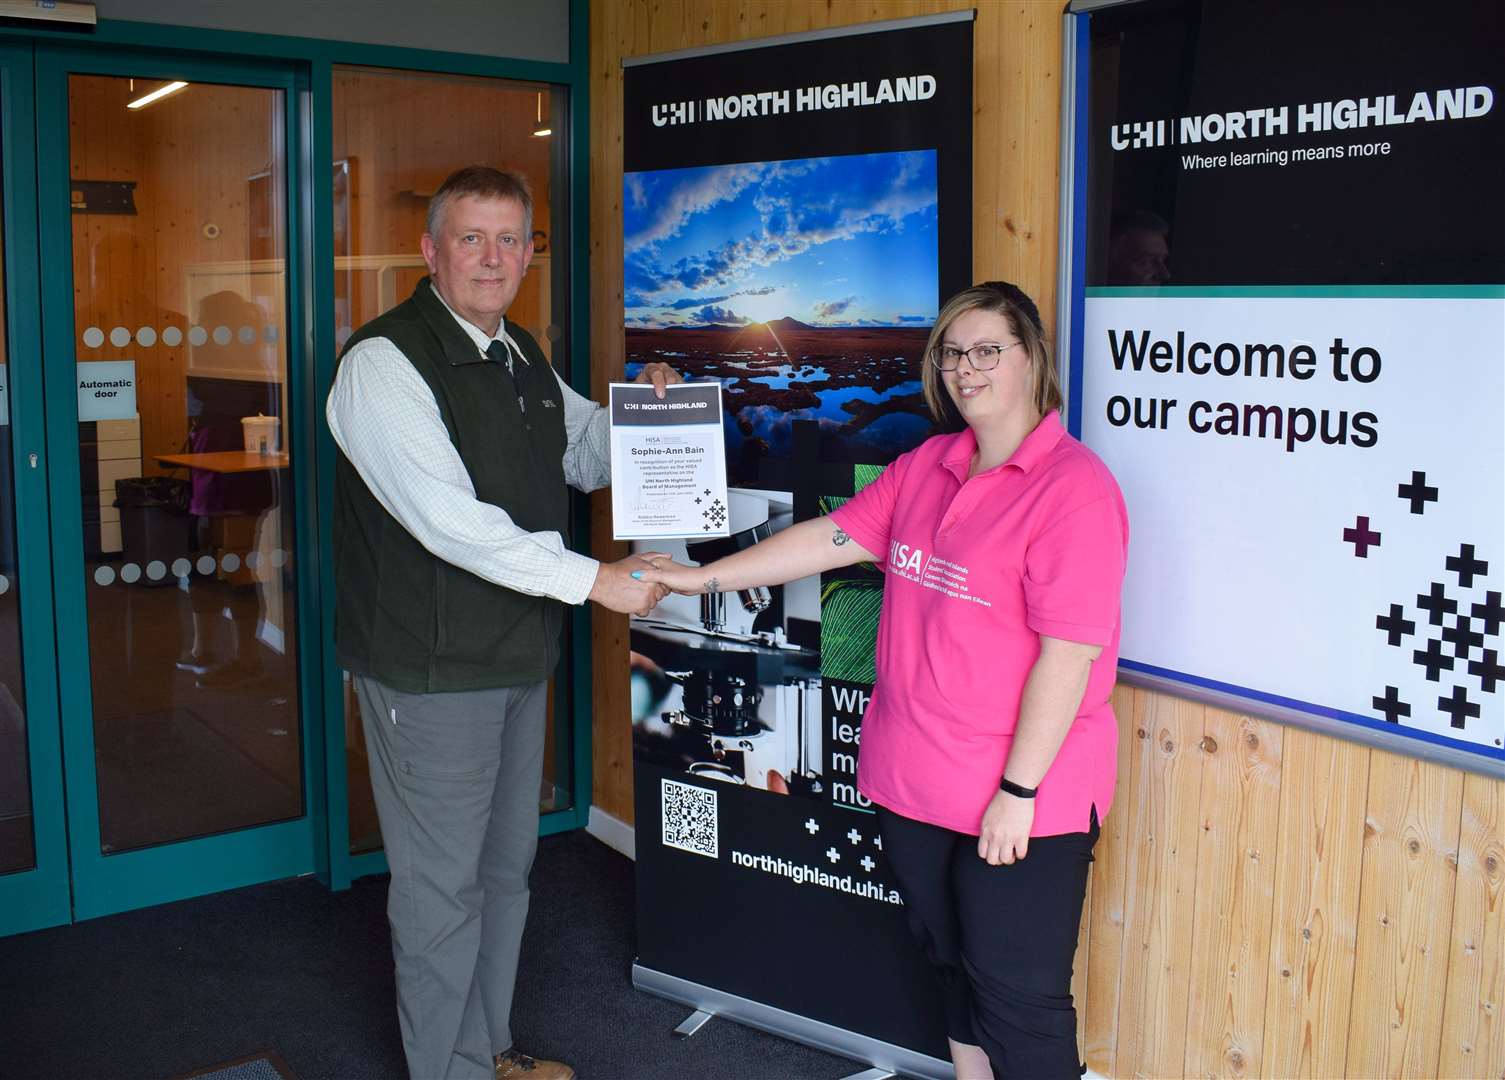 Robbie Rowantree, chairman of the UHI North Highland board of management, presenting the certificate to Sophie-Ann Bain.